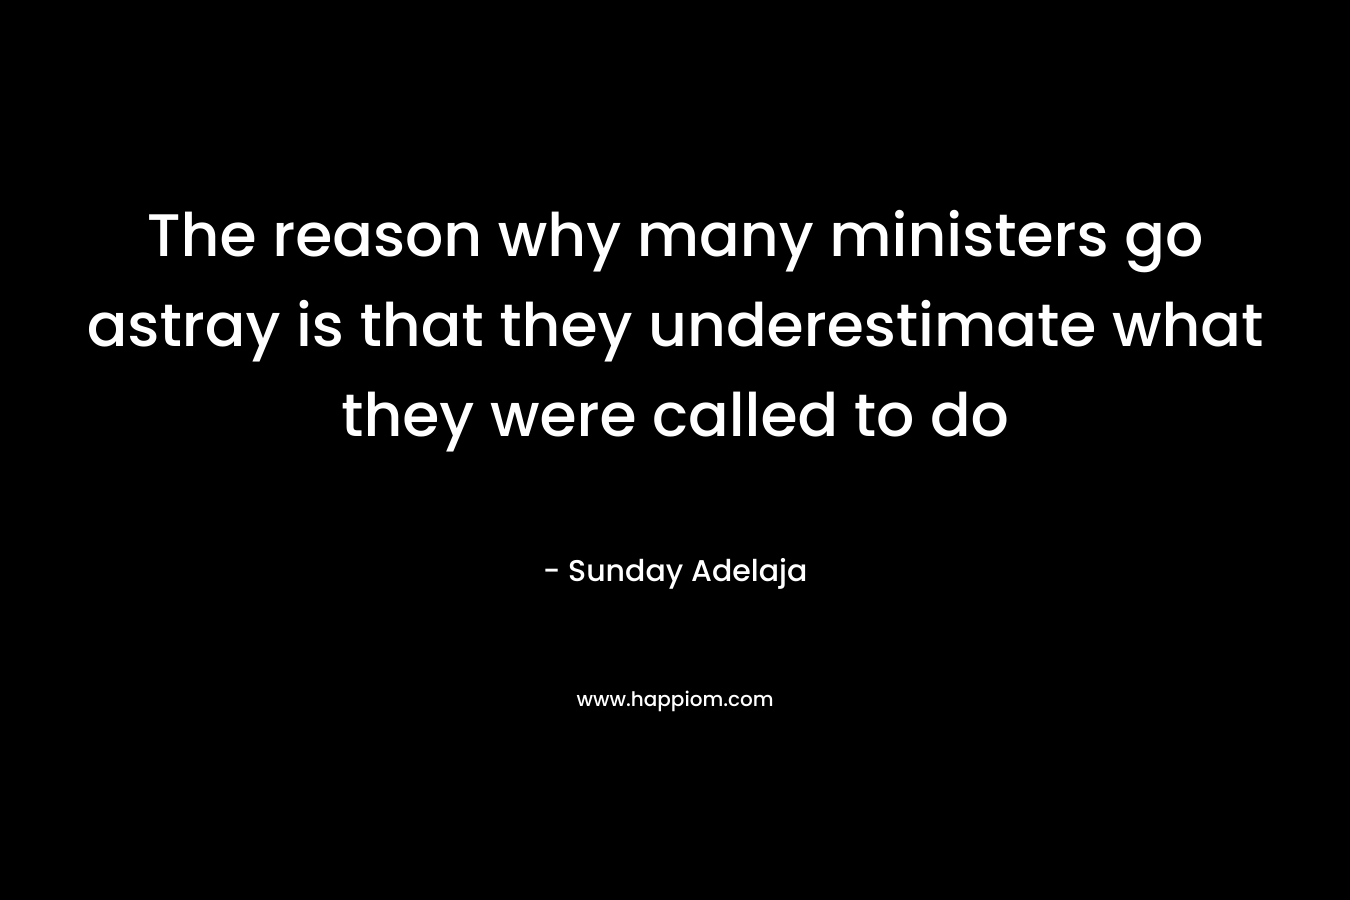 The reason why many ministers go astray is that they underestimate what they were called to do – Sunday Adelaja